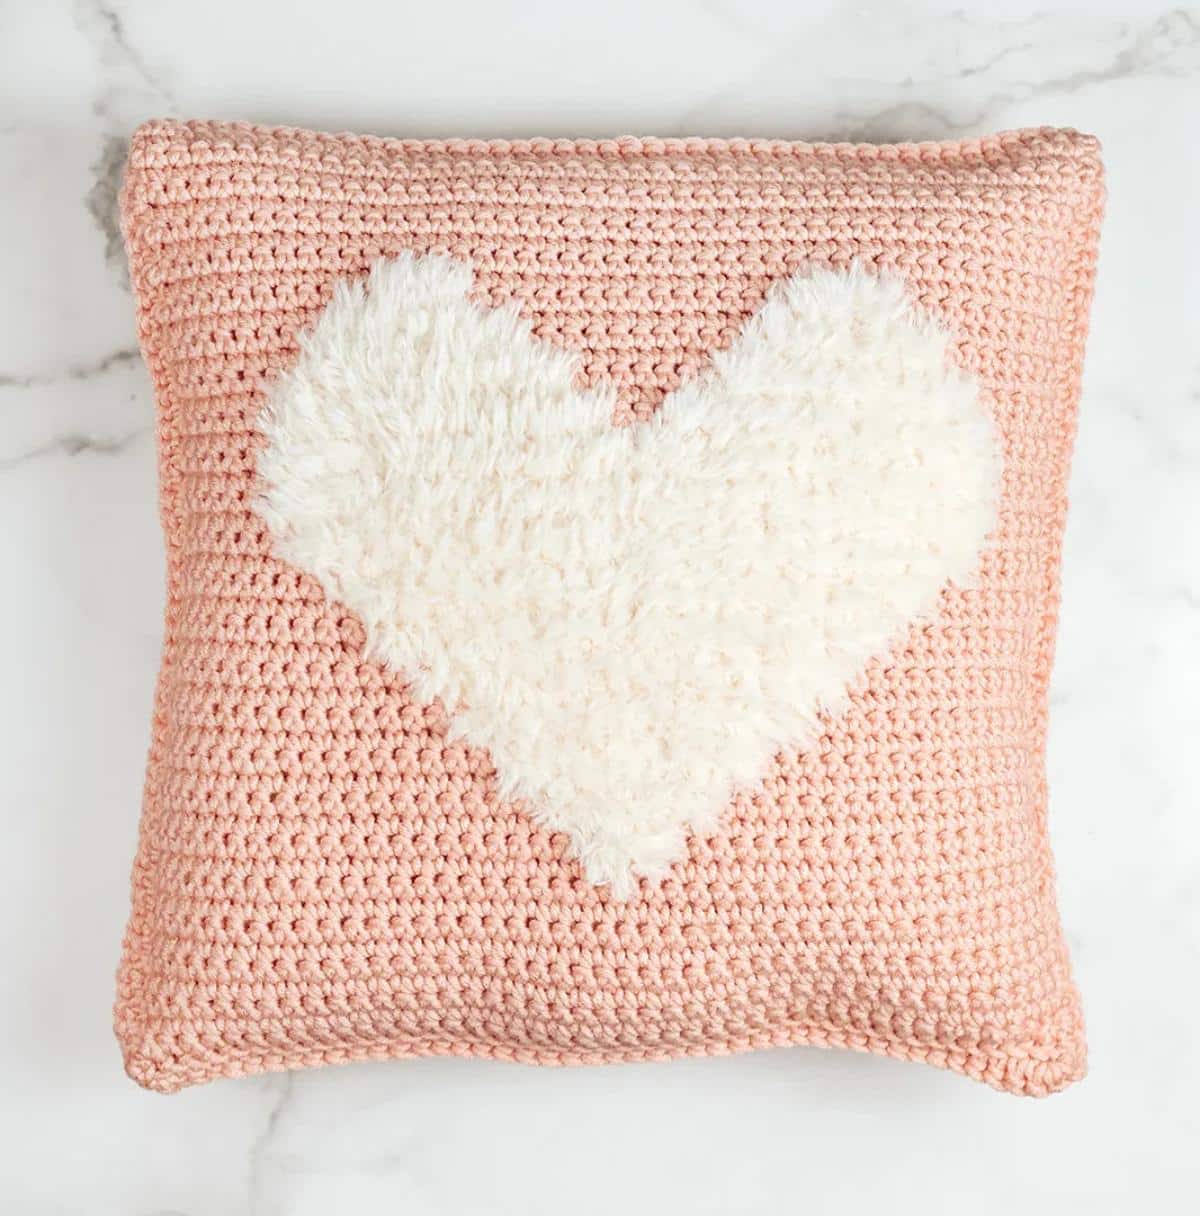 Bulky Love to Cuddle Pillow